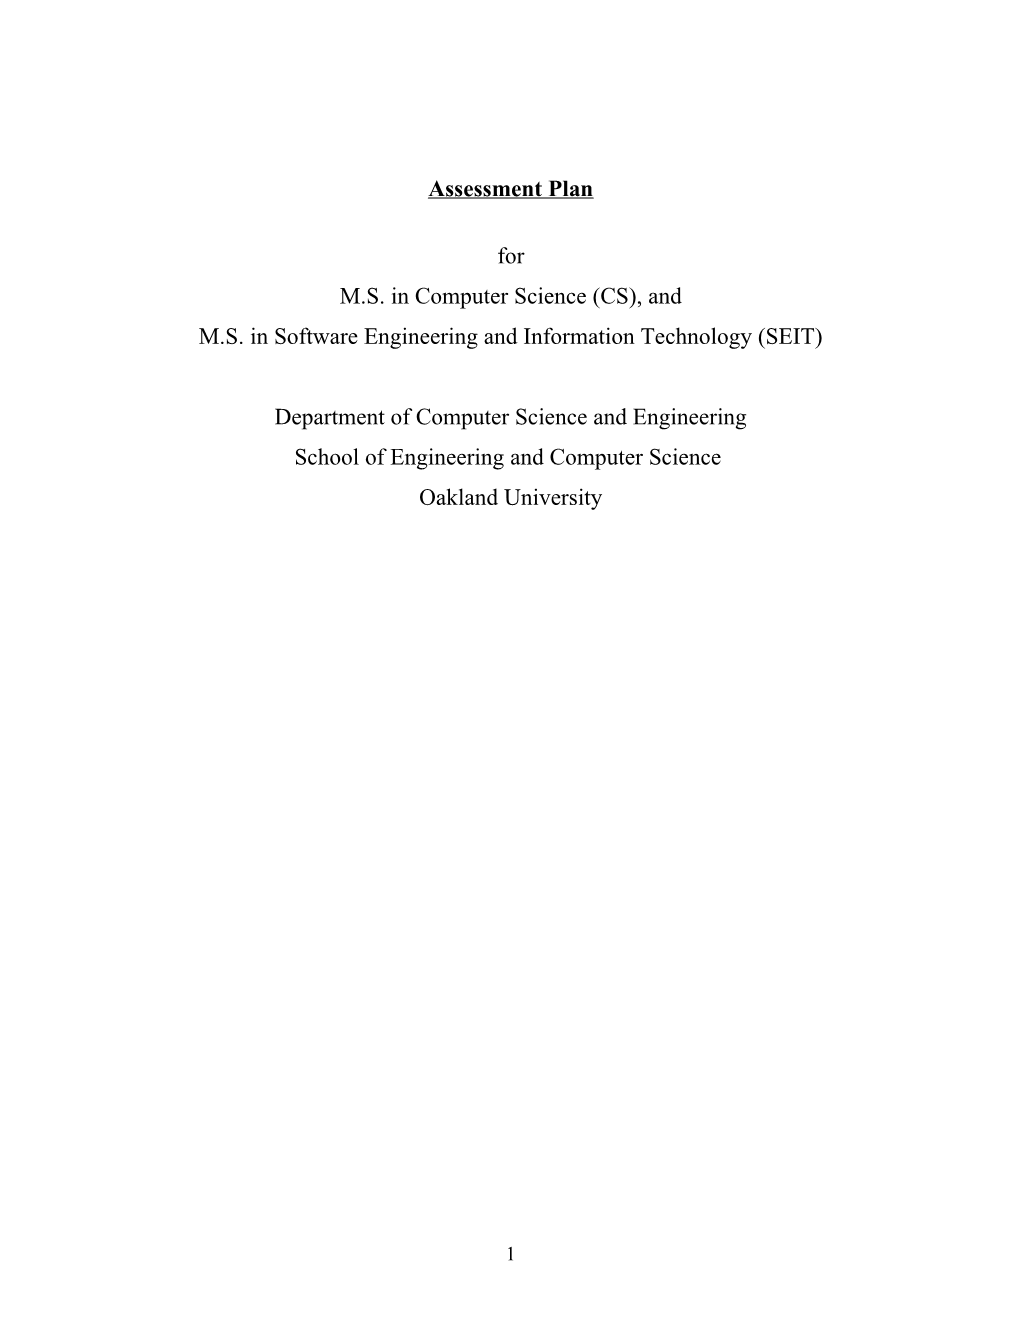 M.S. in Software Engineering and Information Technology (SEIT)